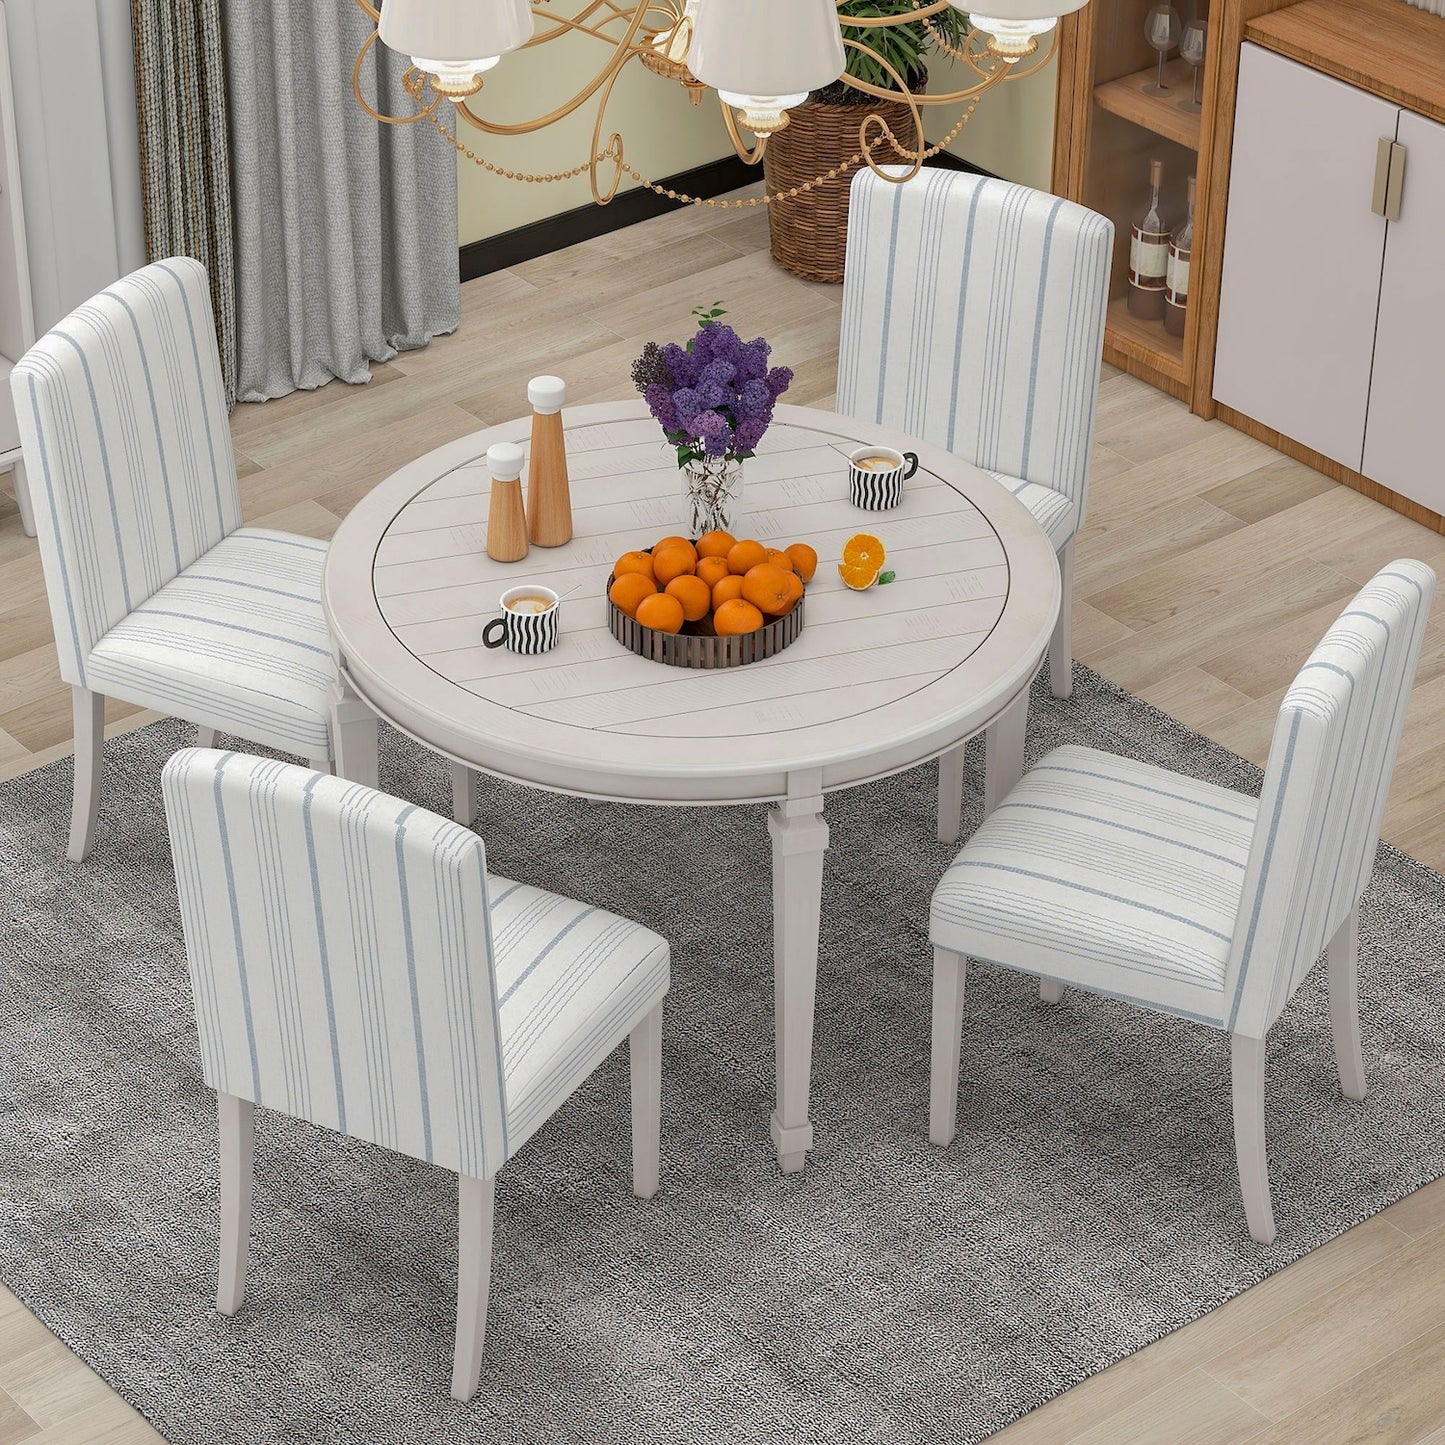 Jolene 5-Piece Dining Set with Striped Chairs - White